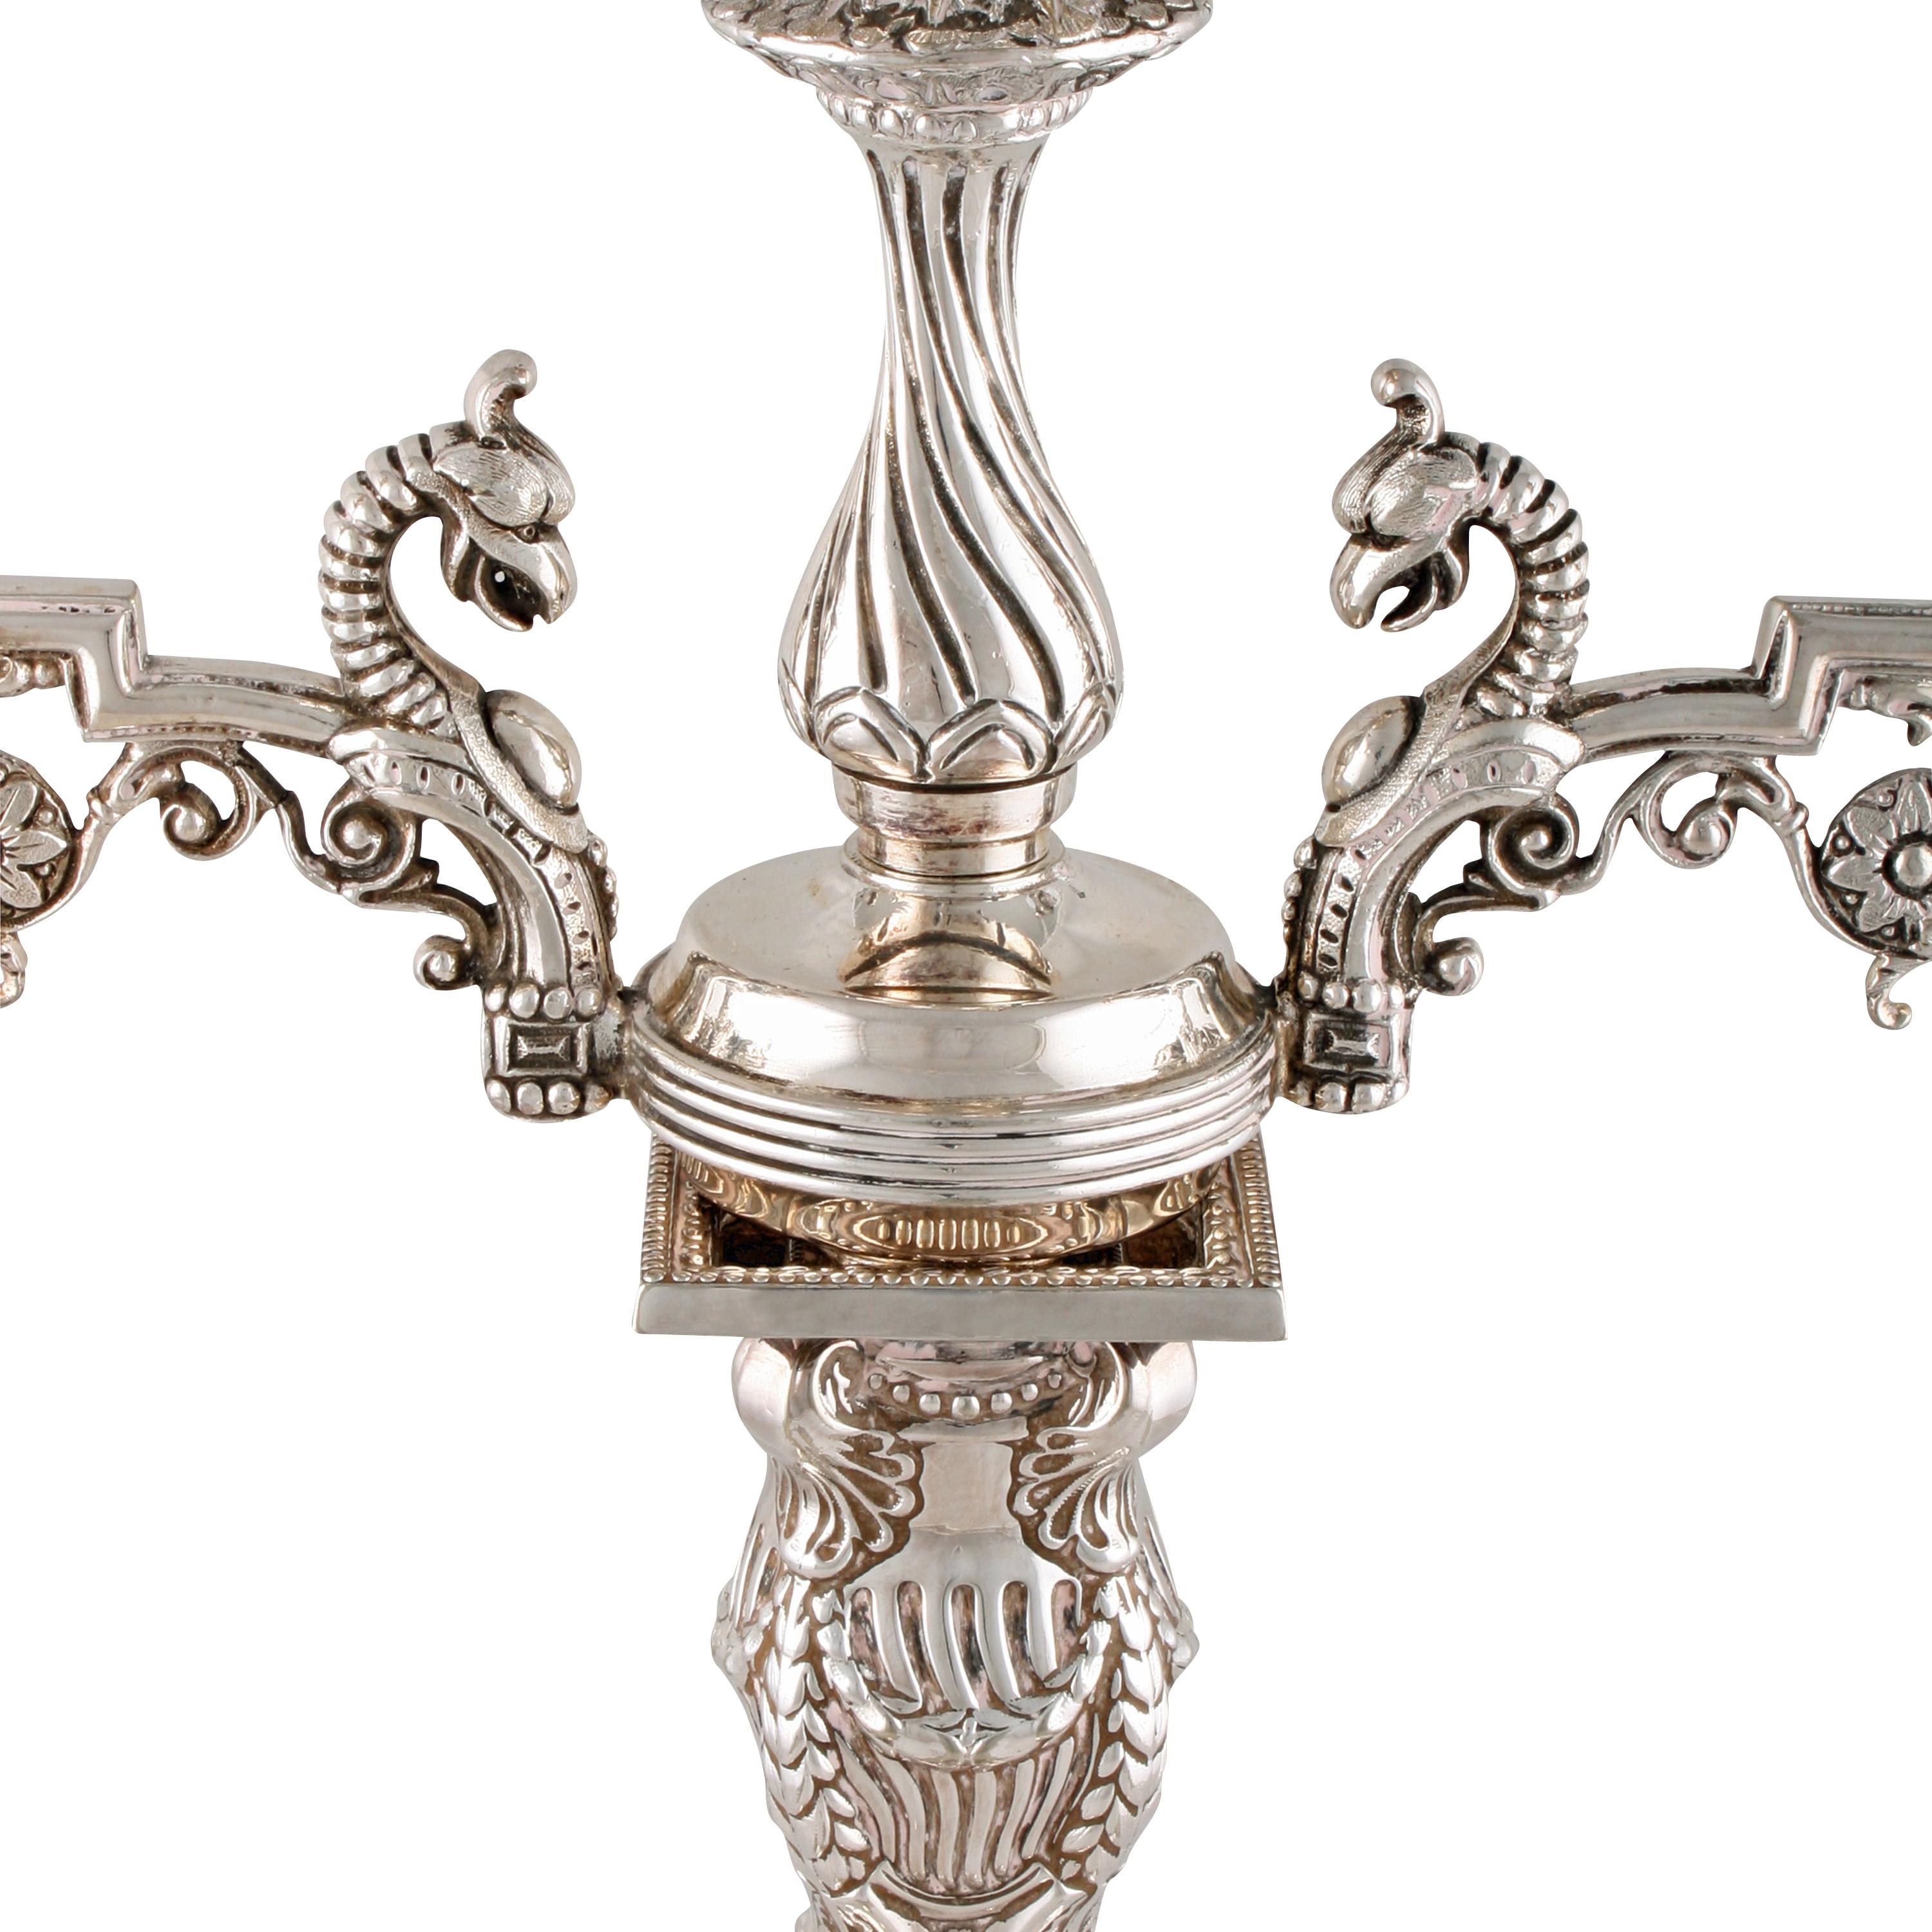 Walker & Hall Silver Plated Candelabra In Excellent Condition For Sale In Newcastle Upon Tyne, GB